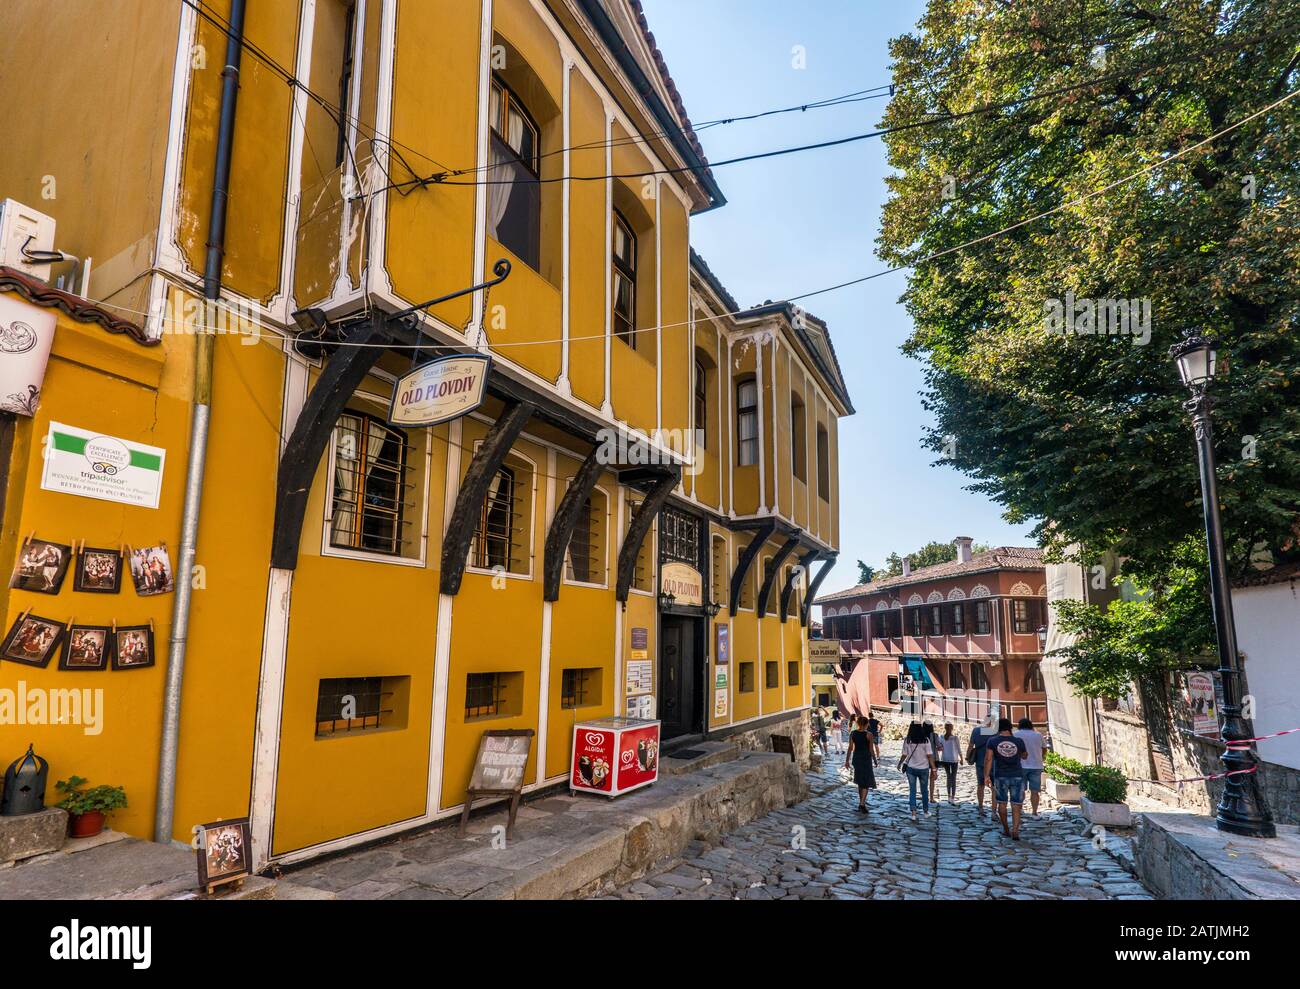 Old Plovdiv Hostel, Balabanov House Museum in distance, historic buildings in Bulgarian National Revival style, in Plovdiv, Bulgaria Stock Photo